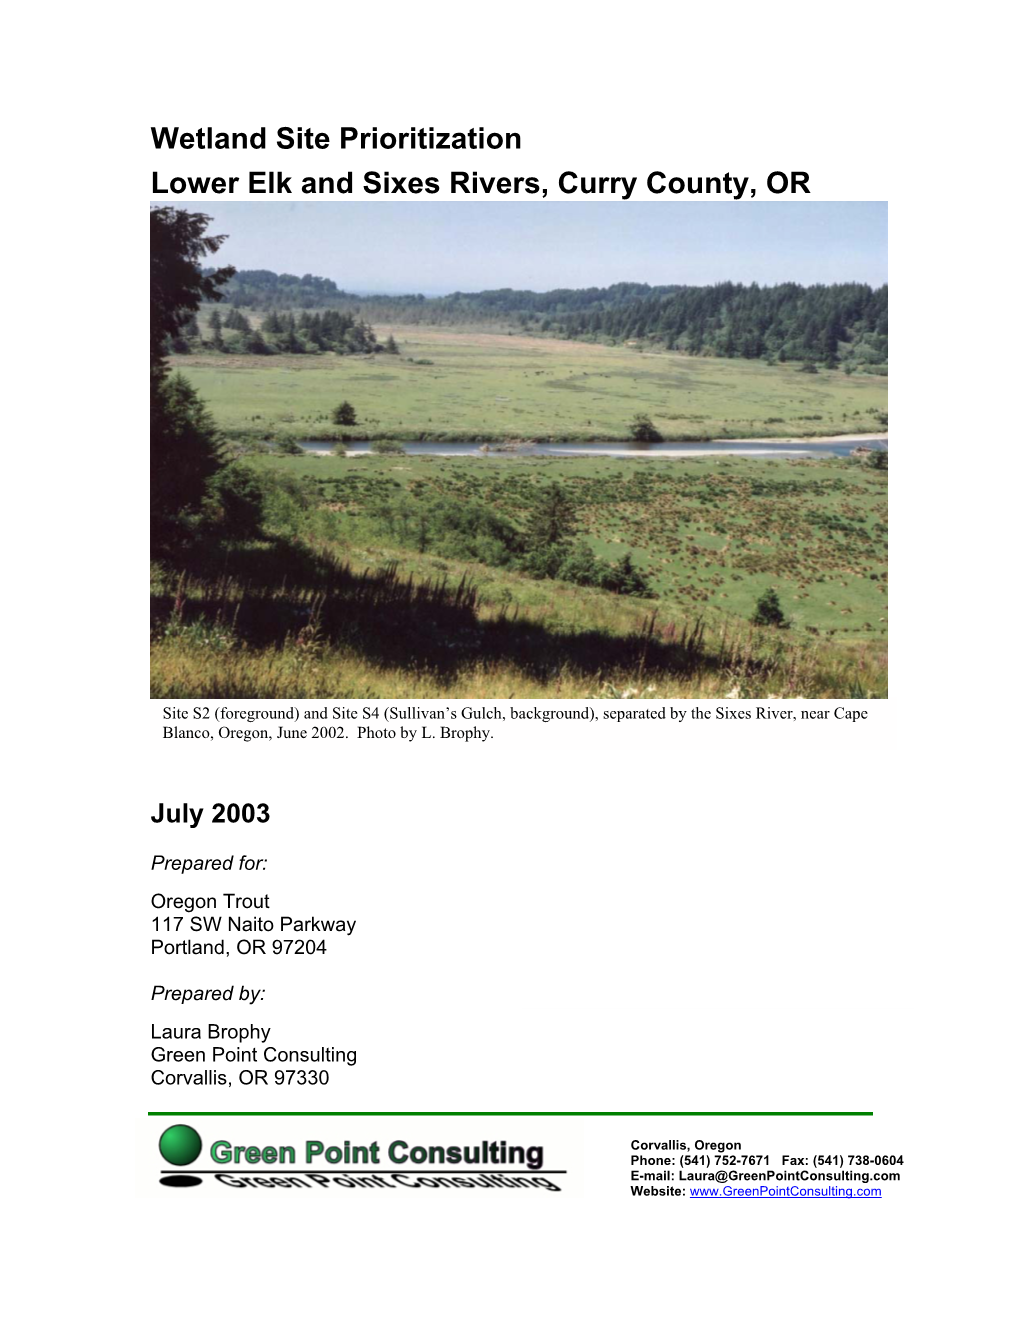 Wetland Site Prioritization Lower Elk and Sixes Rivers, Curry County, OR